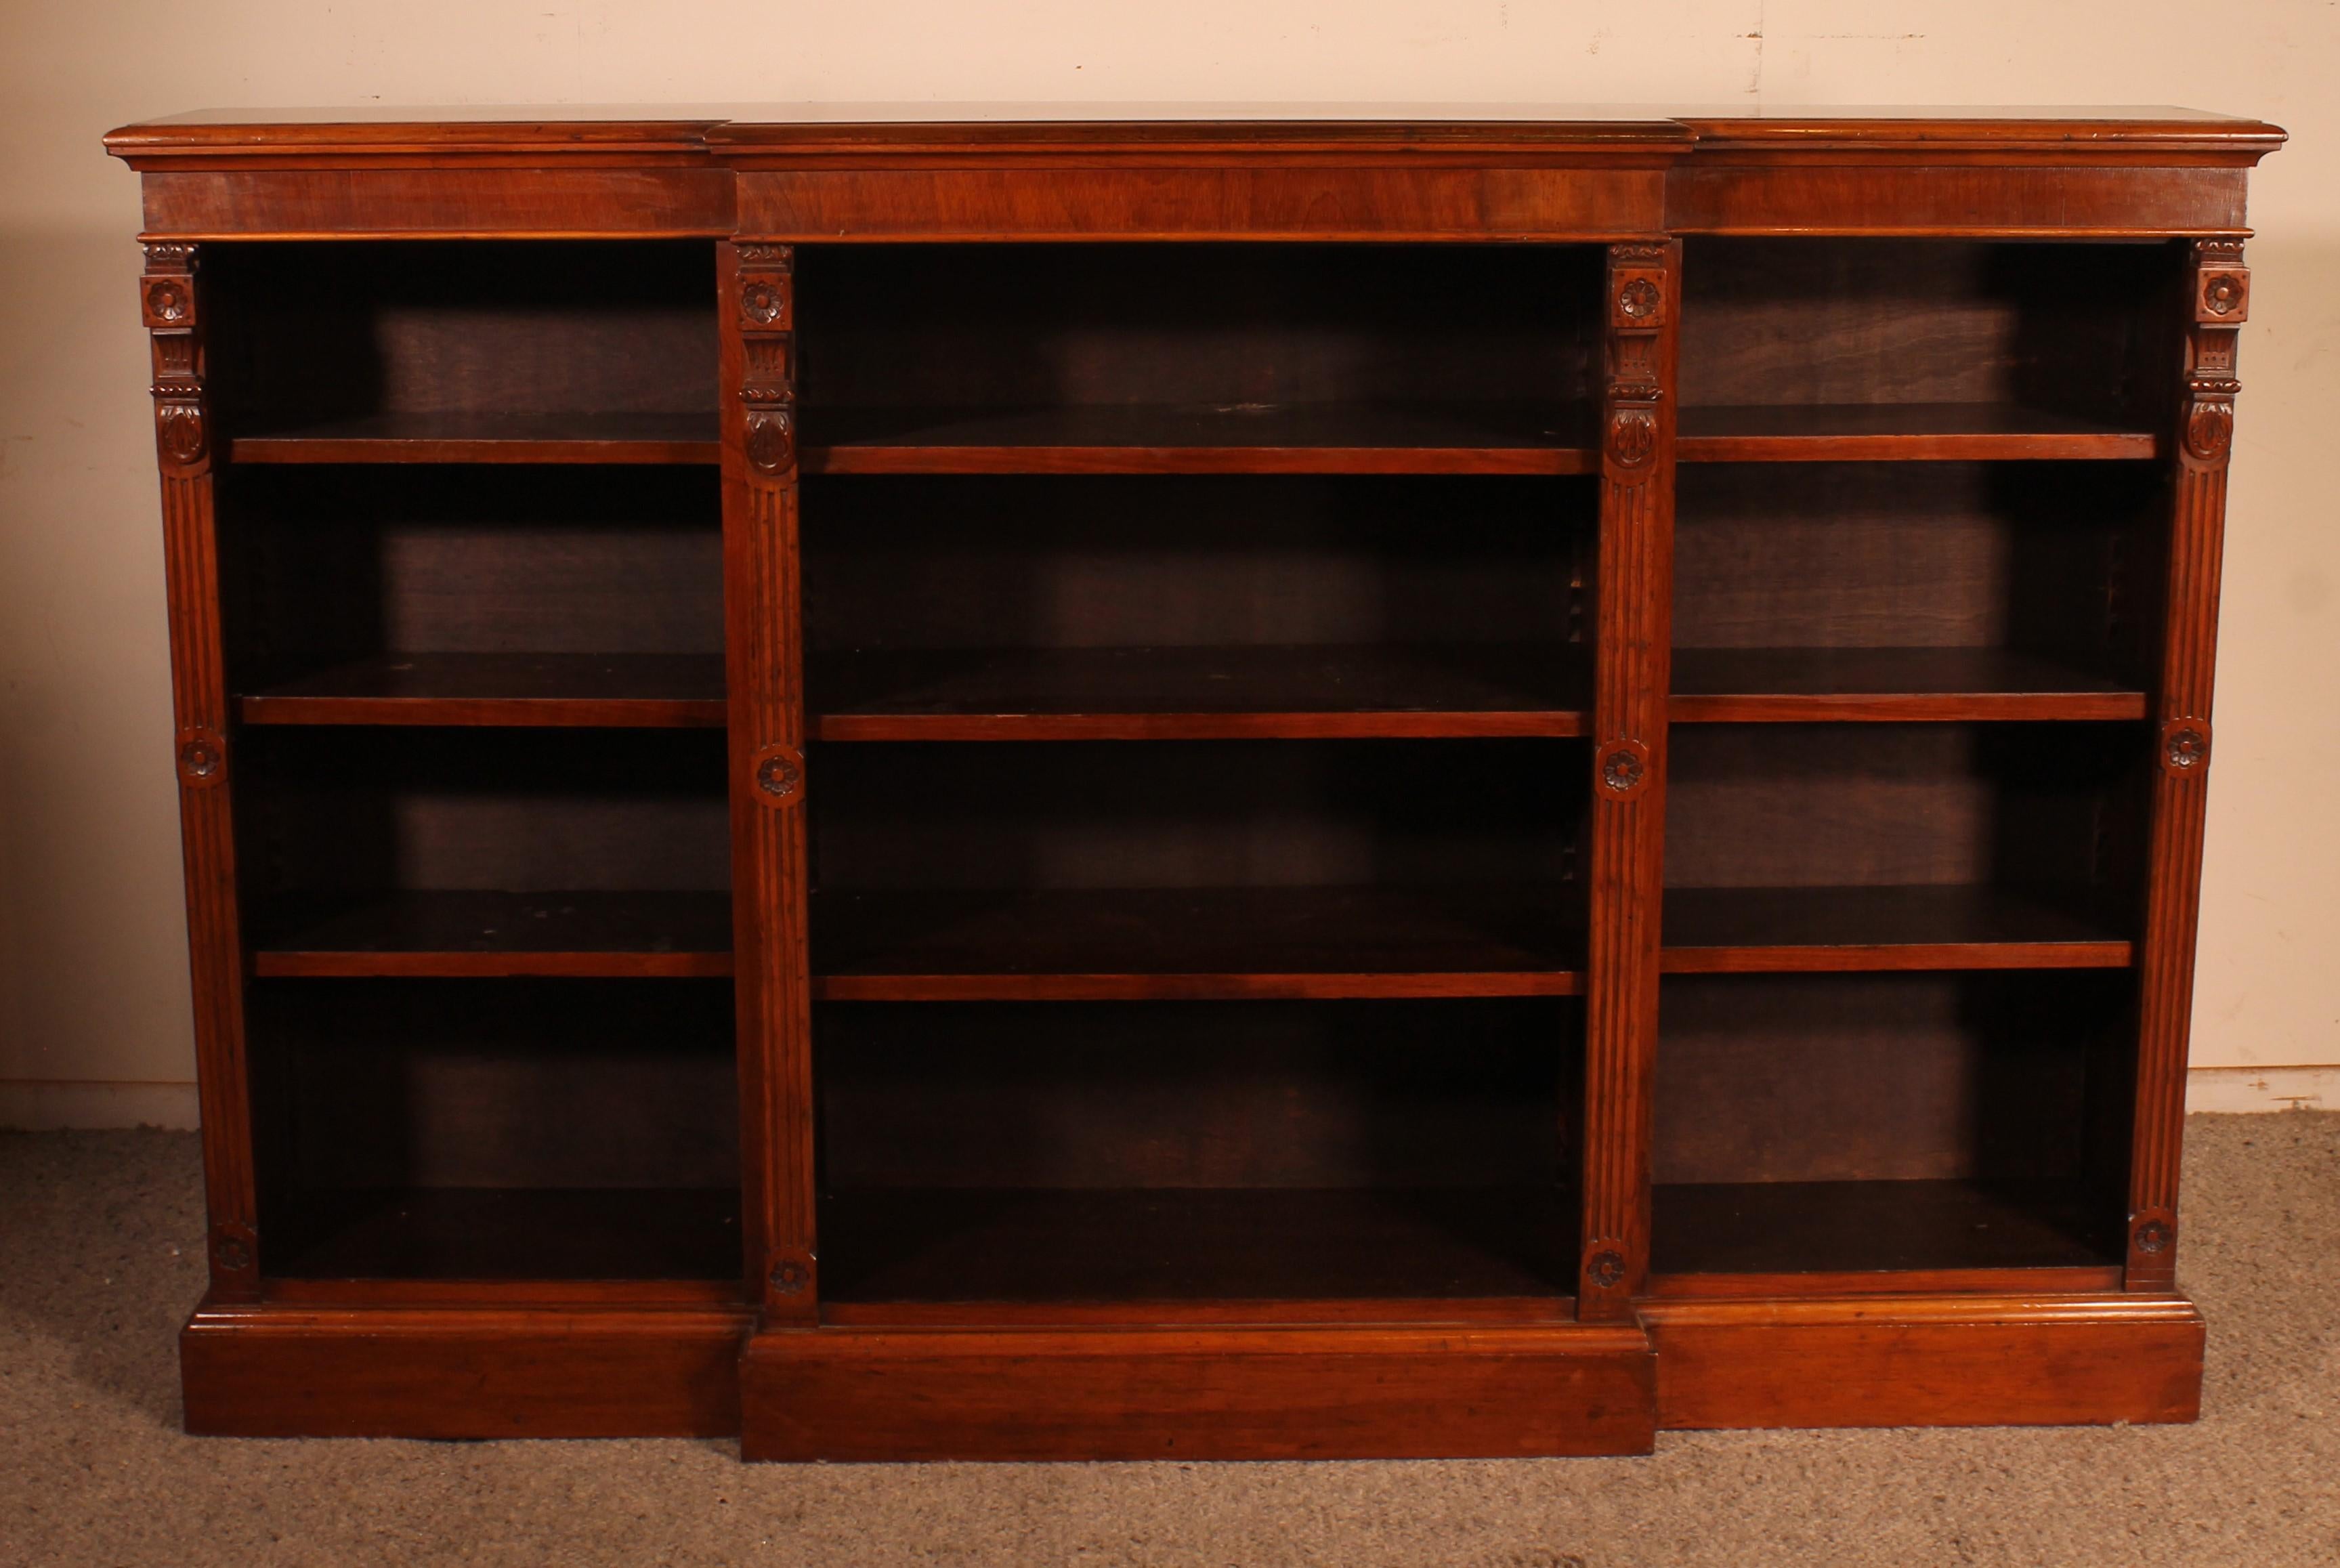 Elegant 19th century mahogany open bookcase from England called Breakfront since it has a forward central section.
It is rare to find a large model with a breakfront that creates movement
uprights decorated with grooves and flowers

Original